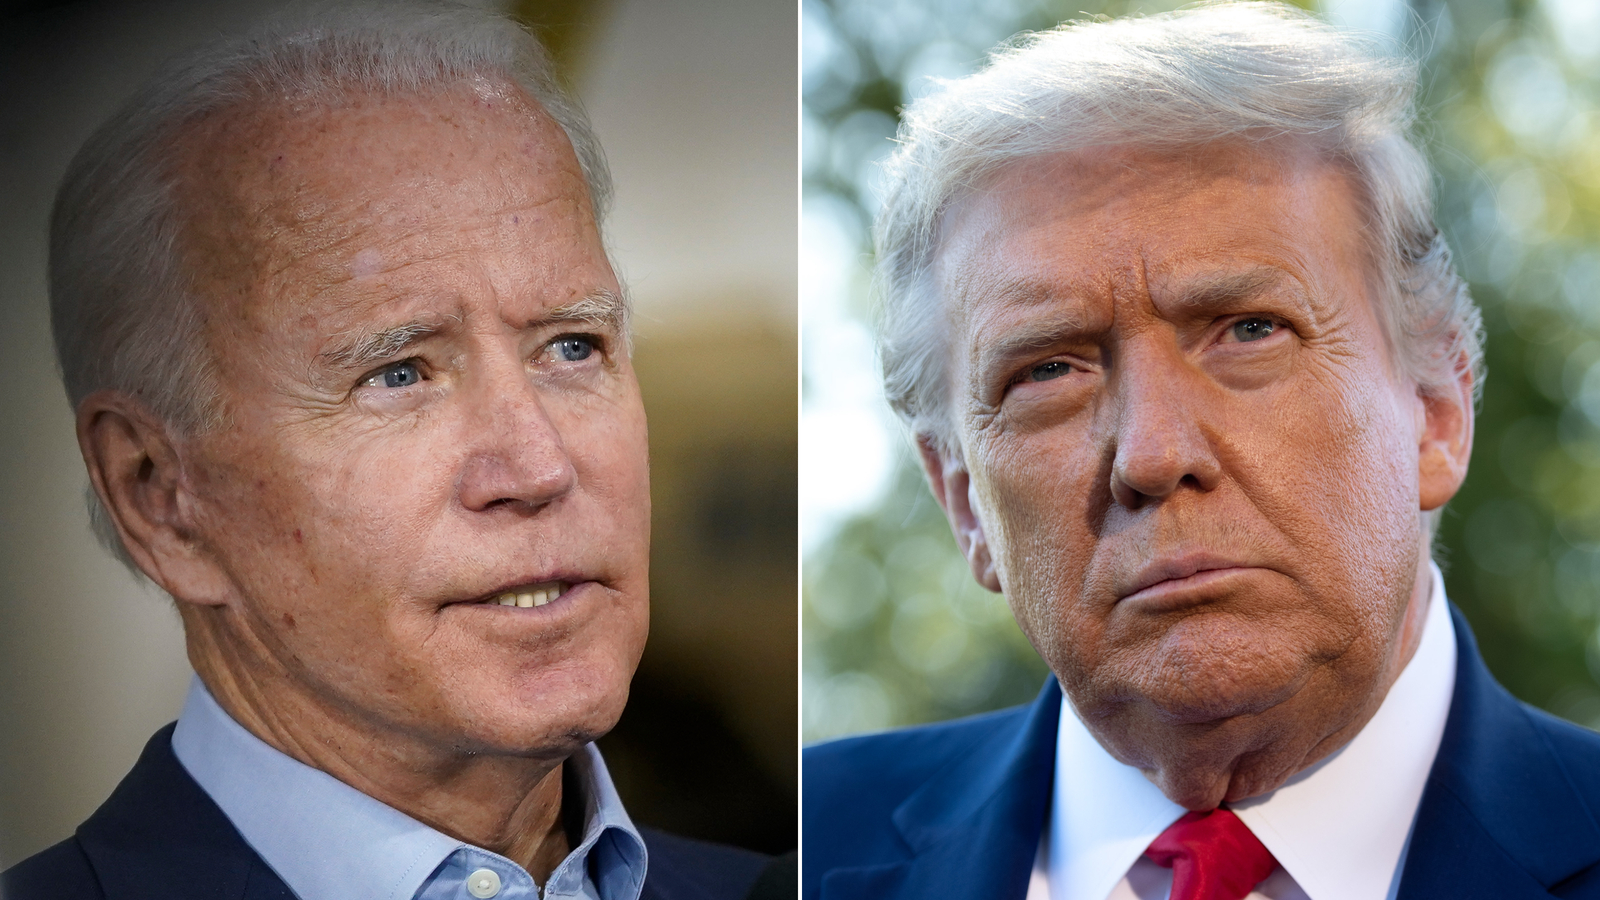 What Cnns Latest Polls Show About The Biden Trump Race In Pennsylvania And Florida 